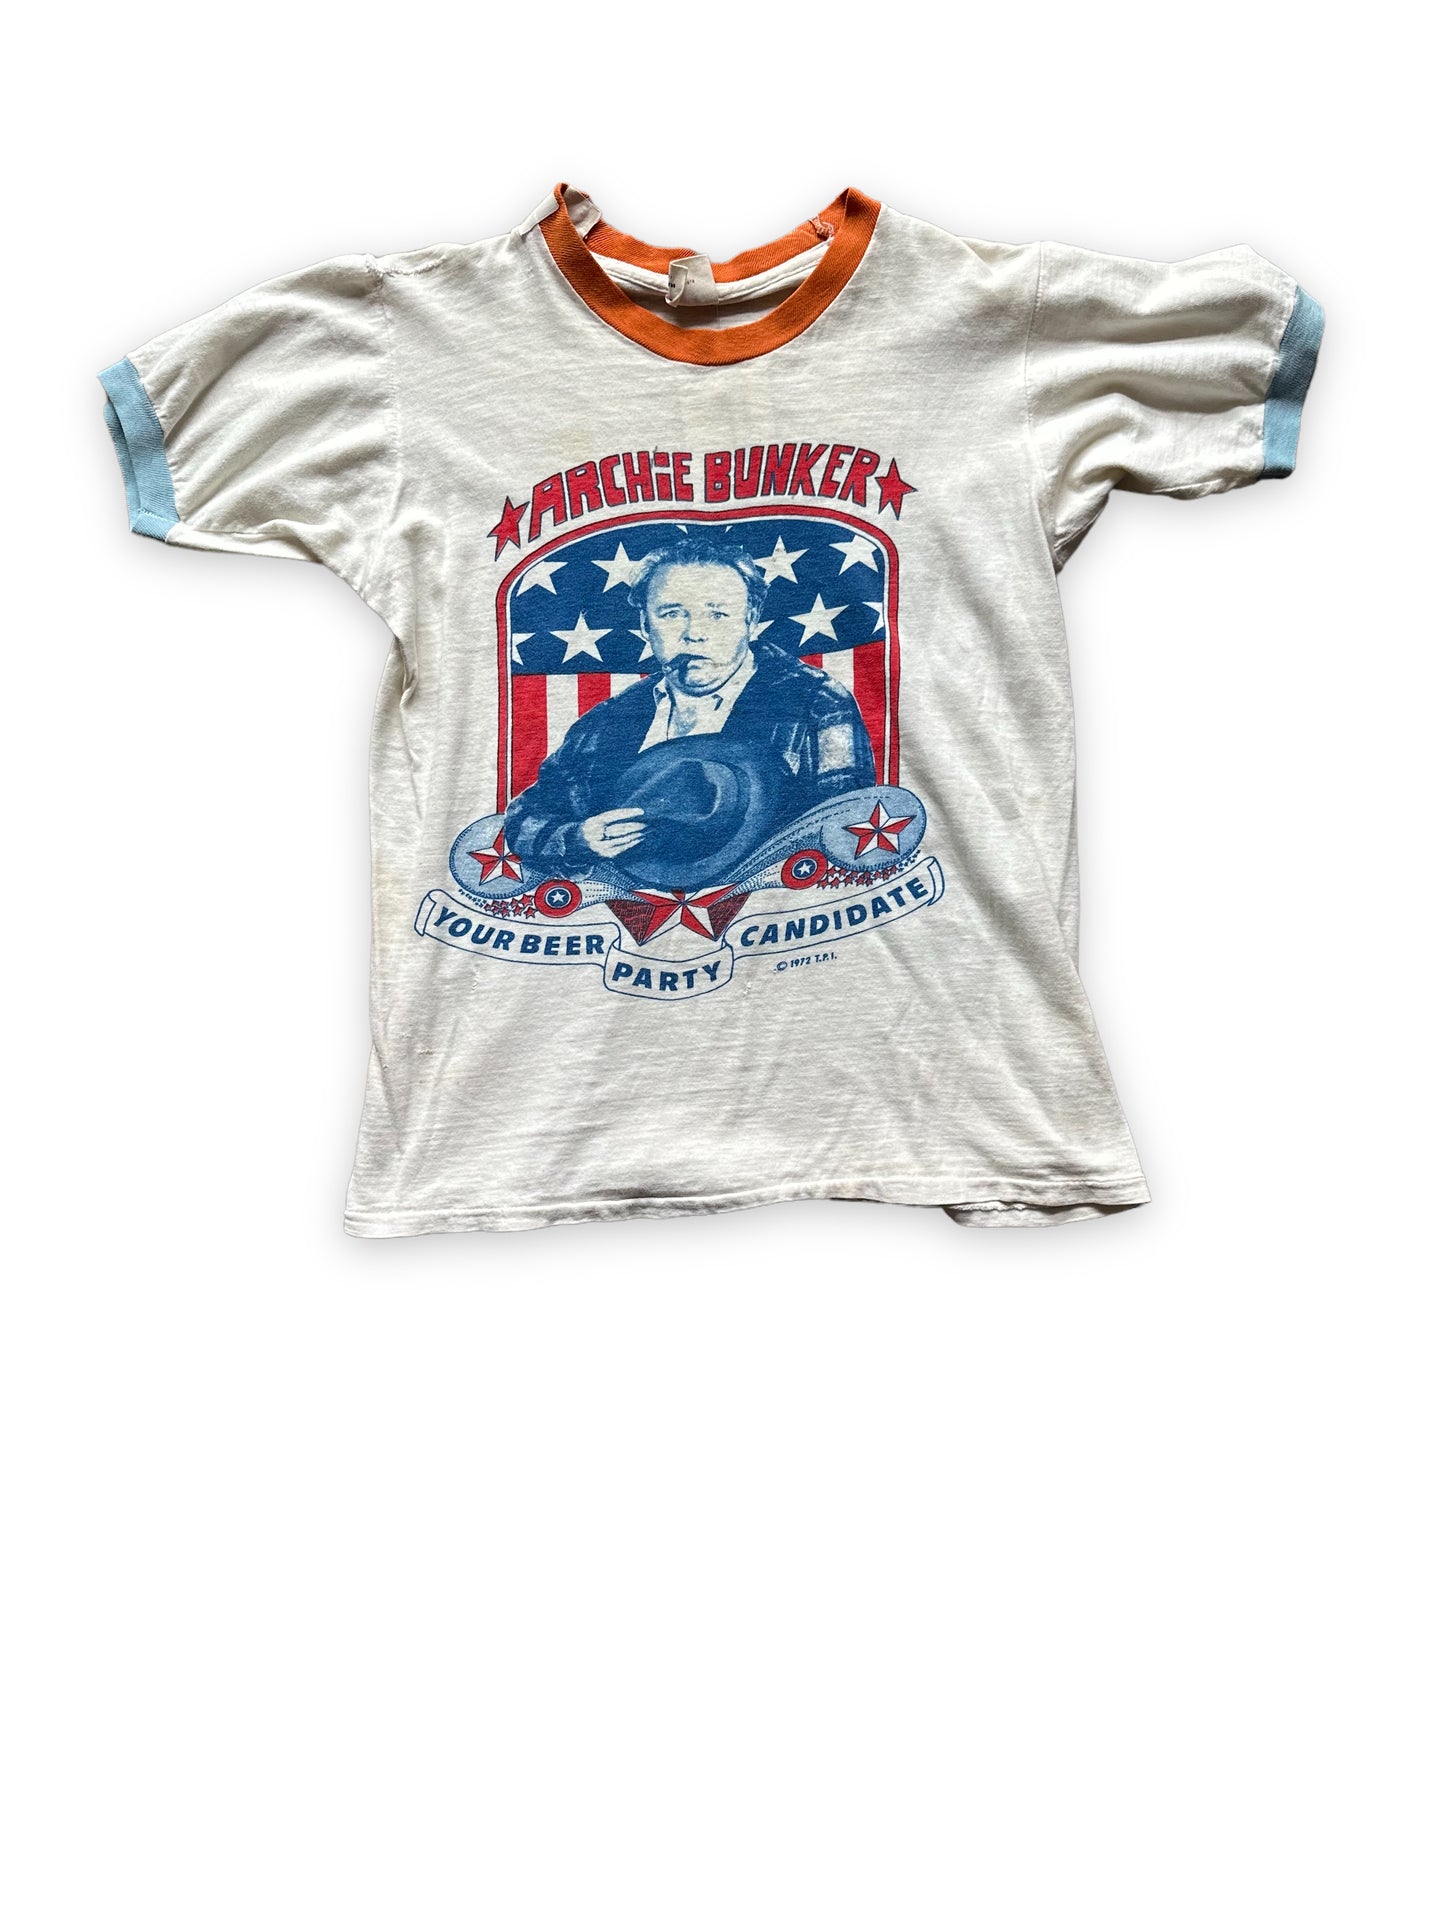 Front View of Vintage Archie Bunker Ringer Tee SZ S |  Vintage Ringer Tee Seattle | Barn Owl Vintage